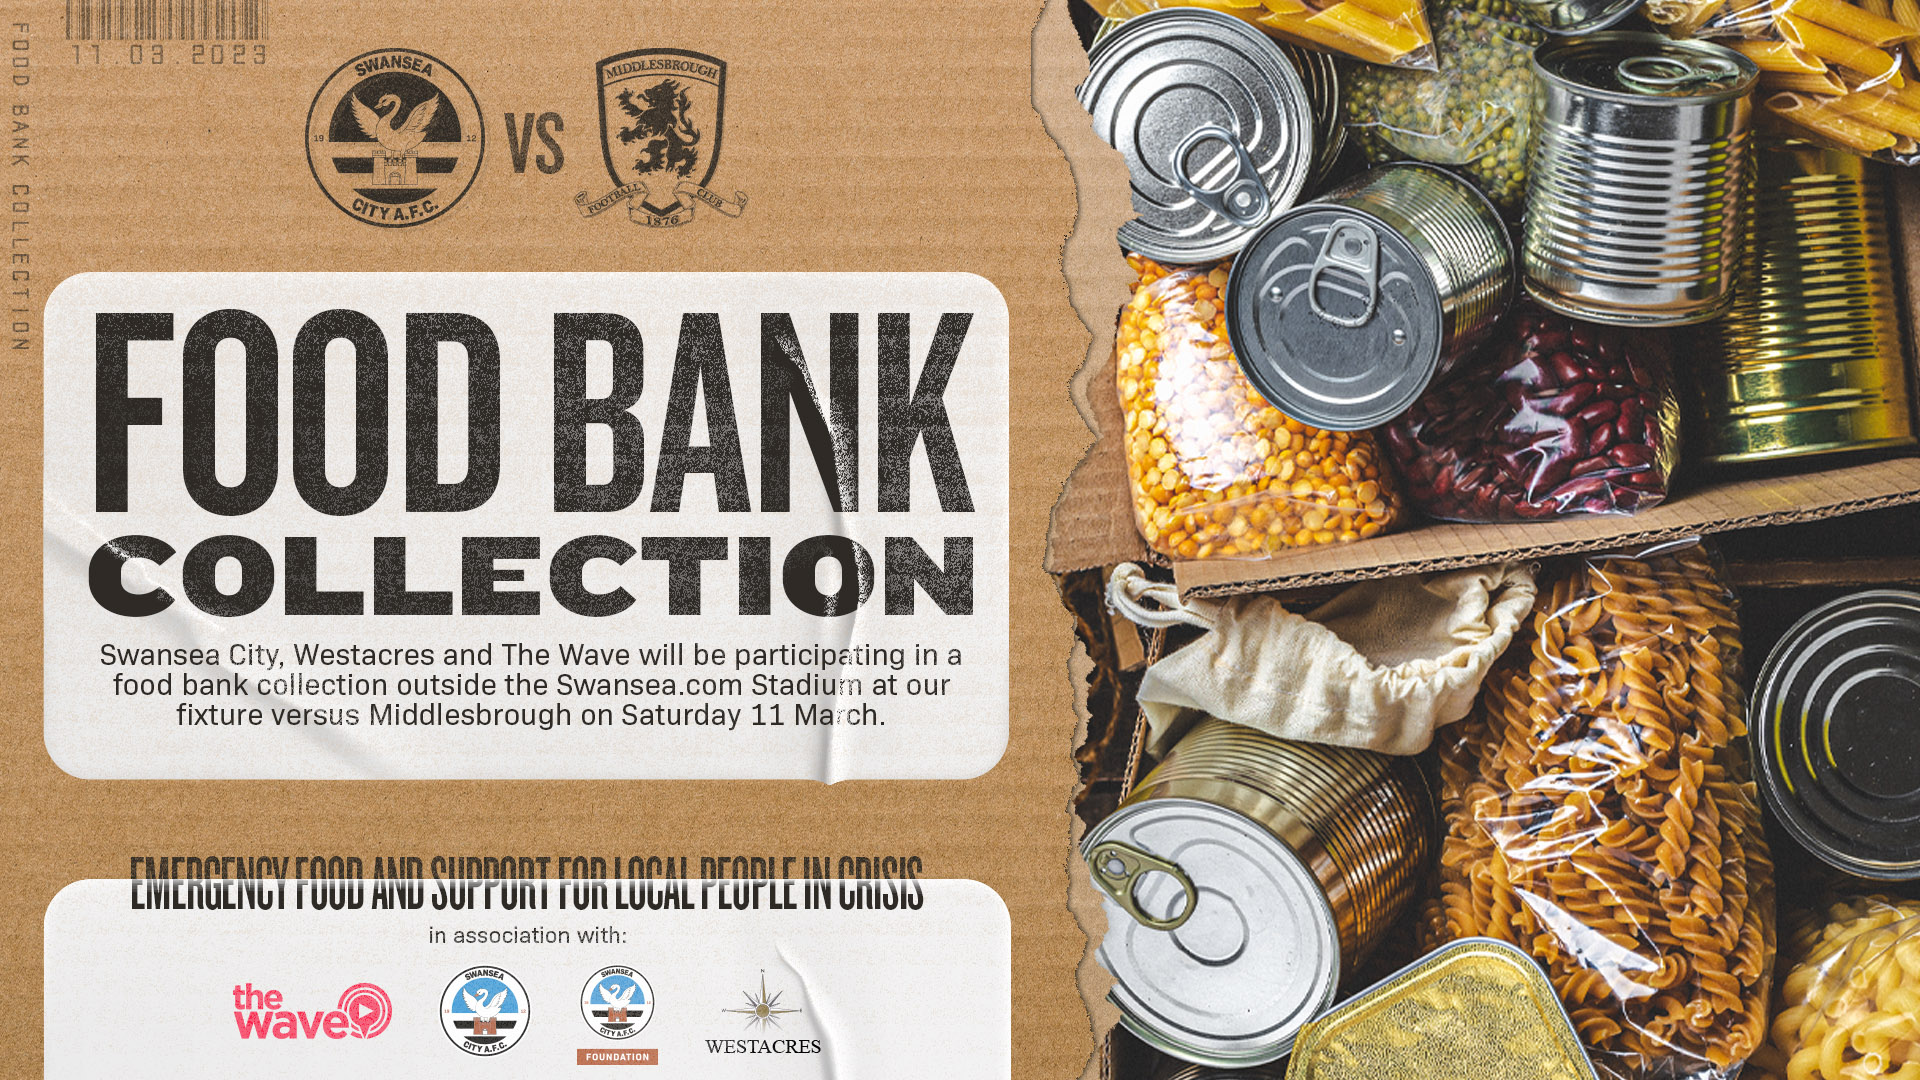 Swansea City, Westacres and The Wave will be hosting a food bank collection at the upcoming home match against Middlesbrough on March 11.